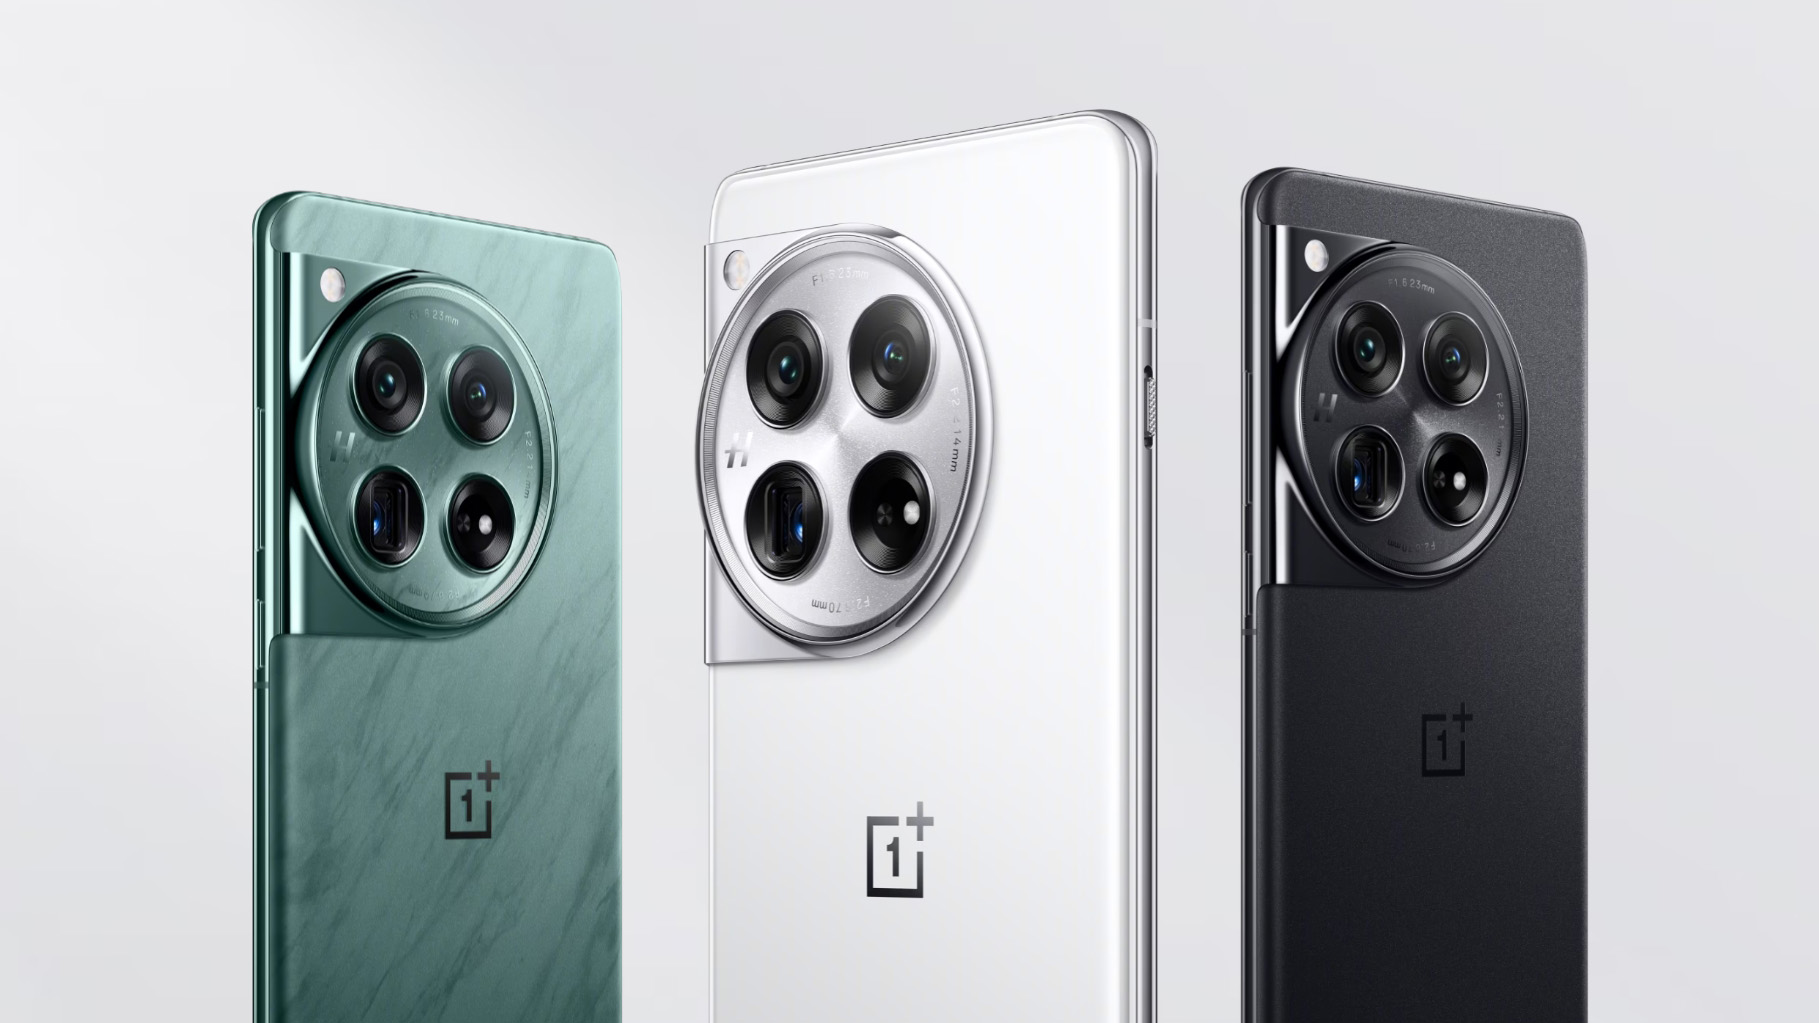 OnePlus 12 set to launch on its 10th anniversary; date and details inside